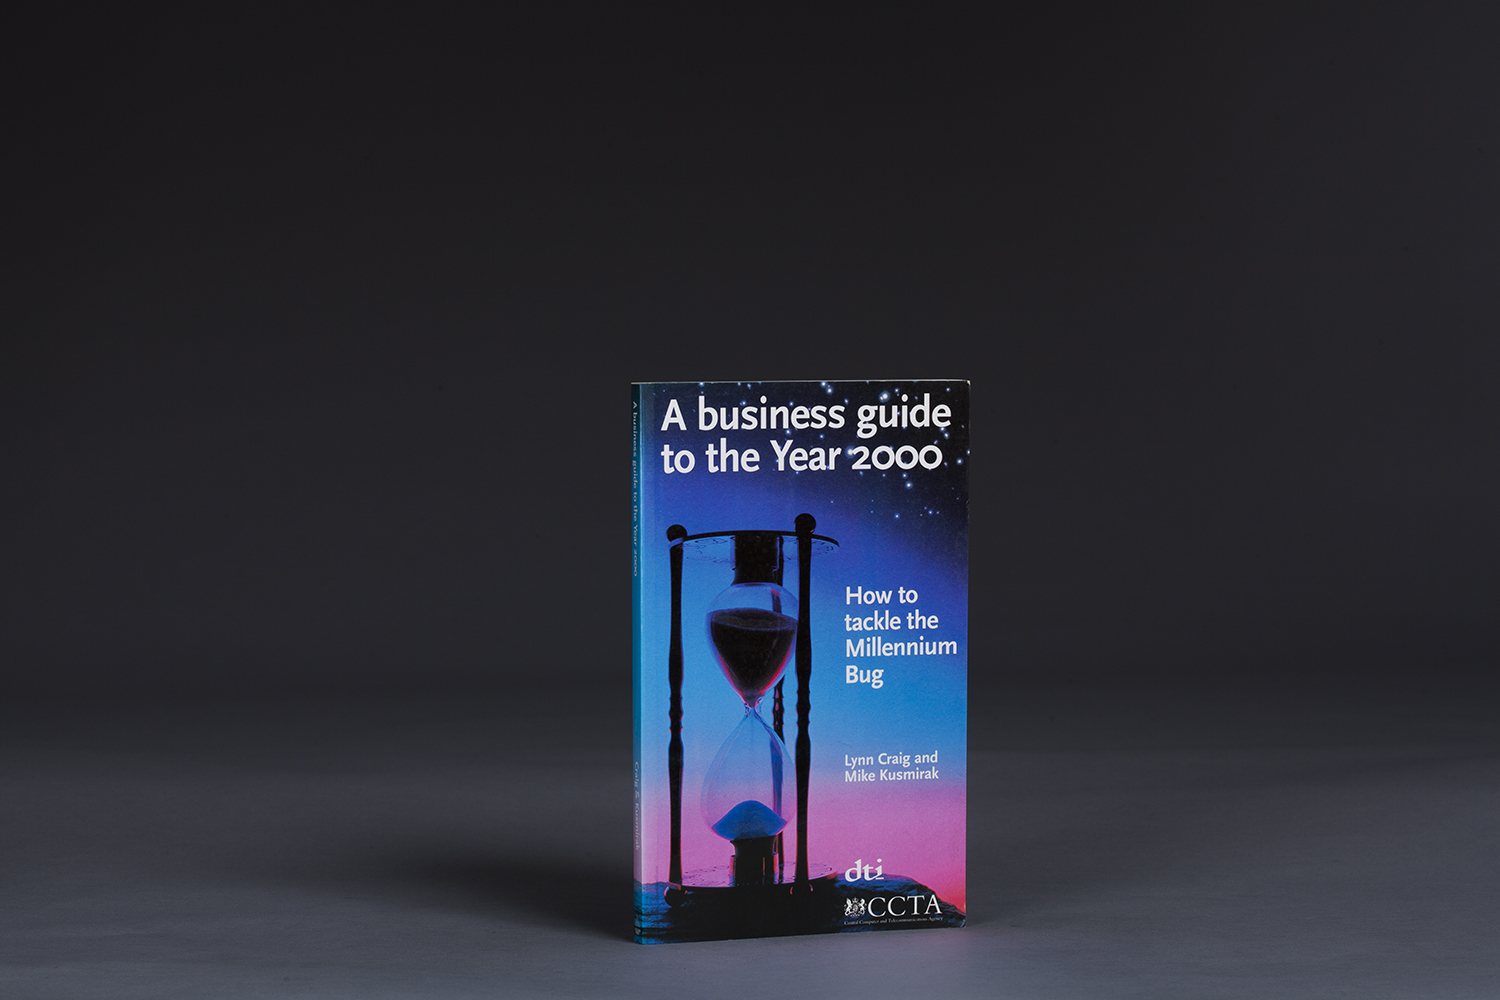 A Business Guide to the Year 2000 - 0508 Cover.jpg